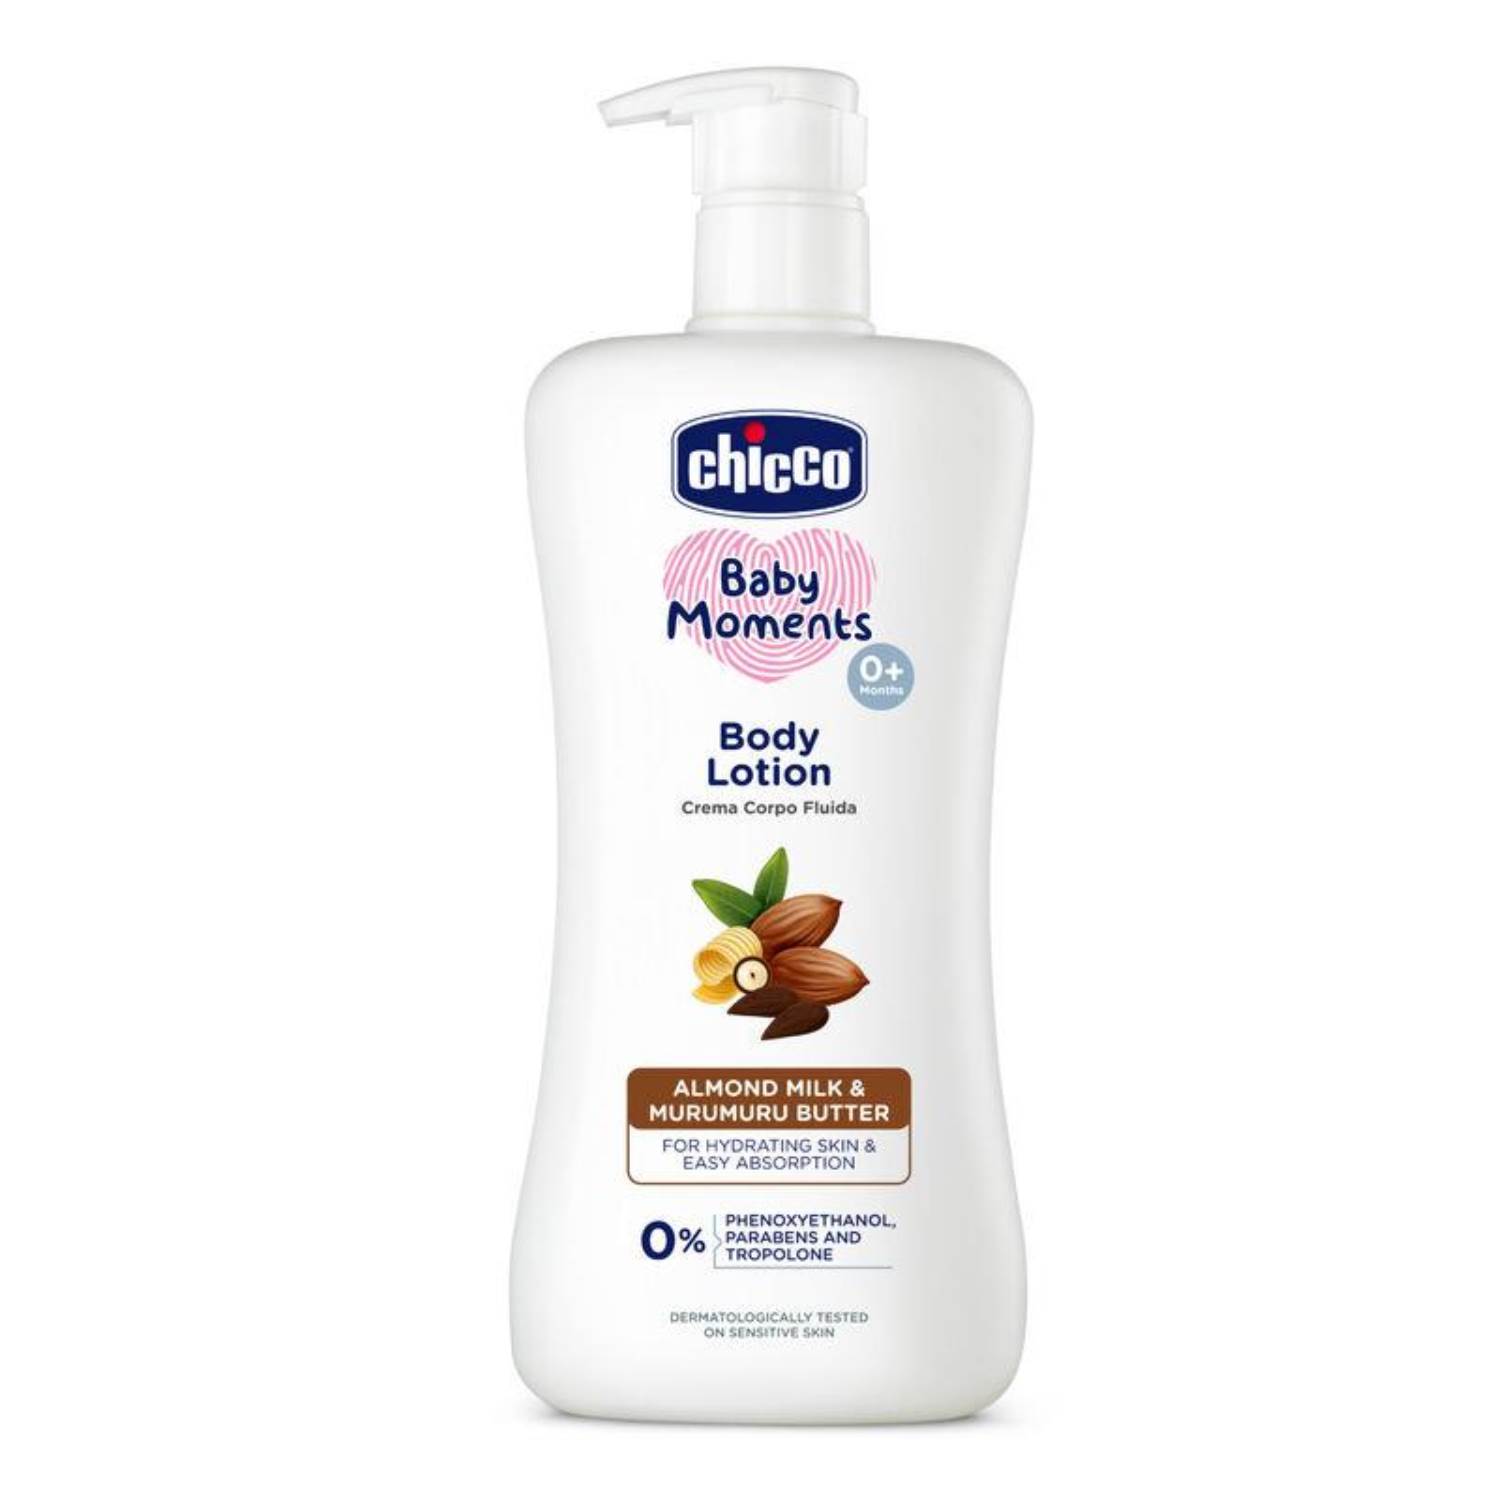 Chicco Baby Moments Body Lotion, New Advanced Formula with Natural